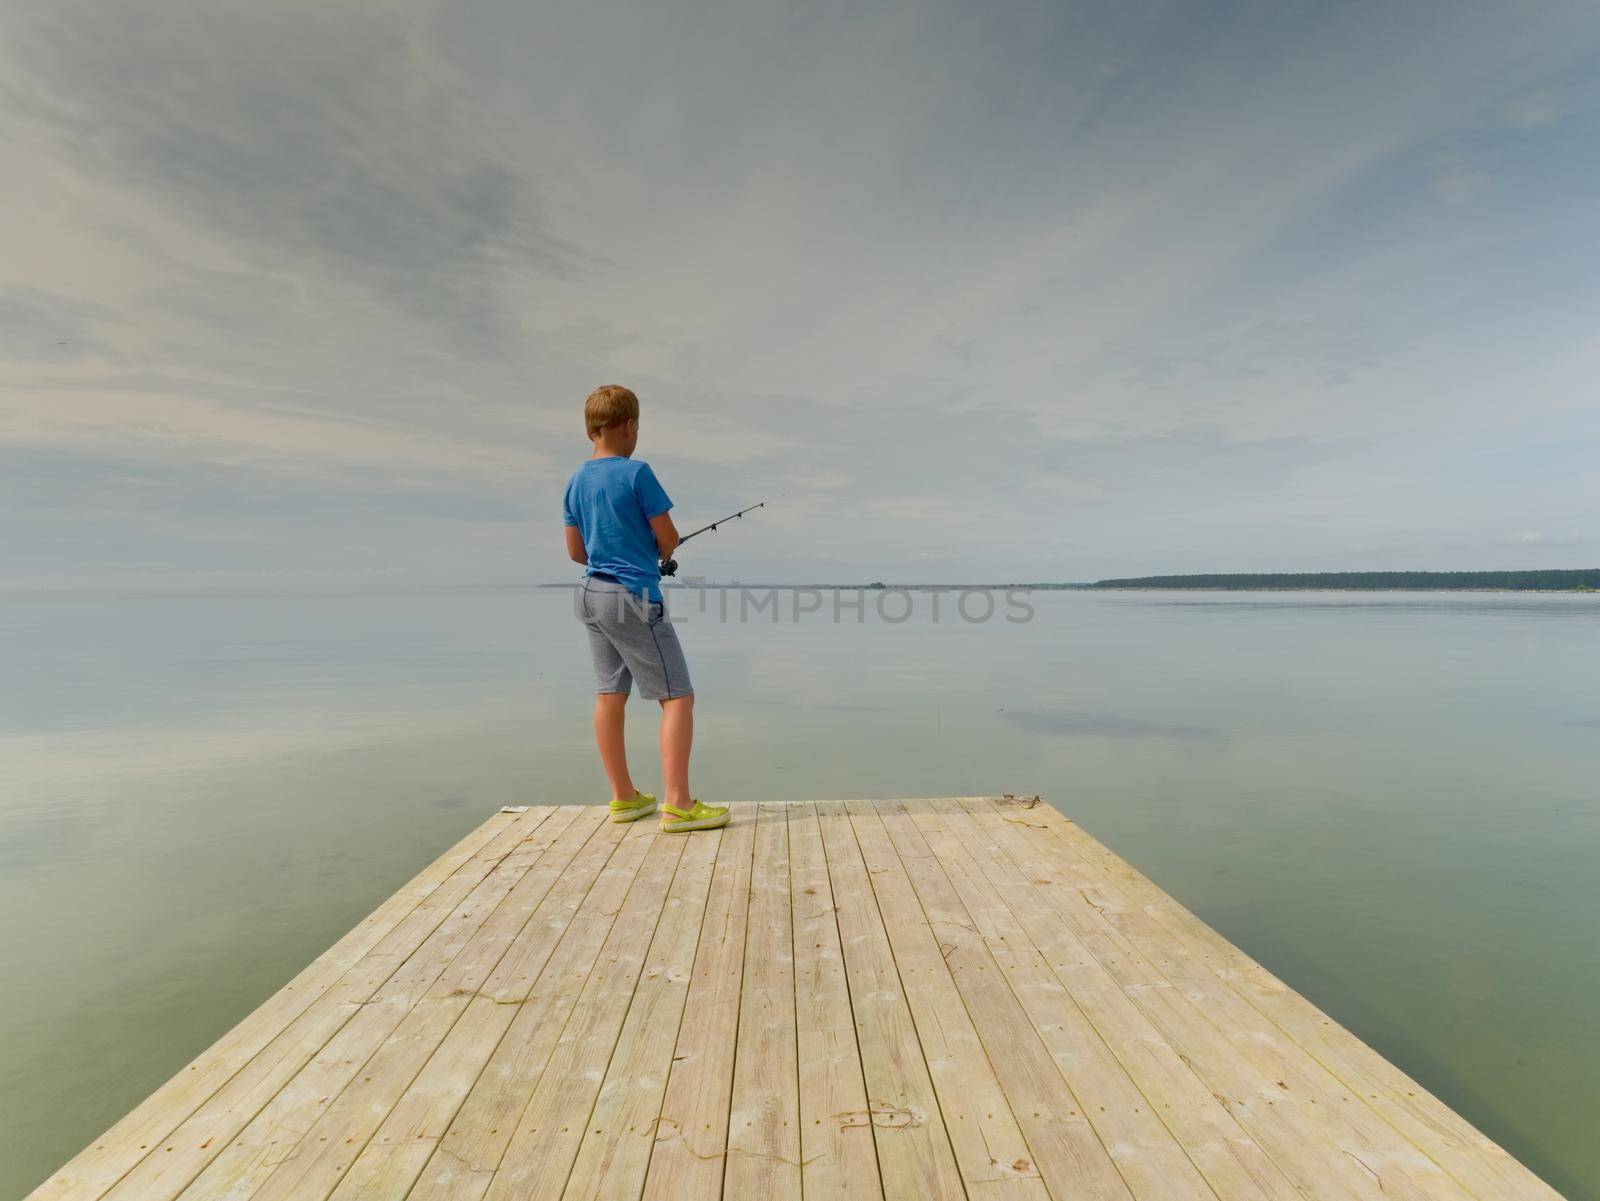 Small blond hair boy is fishing at the end of wooden mole. Smooth water level in bay by rdonar2